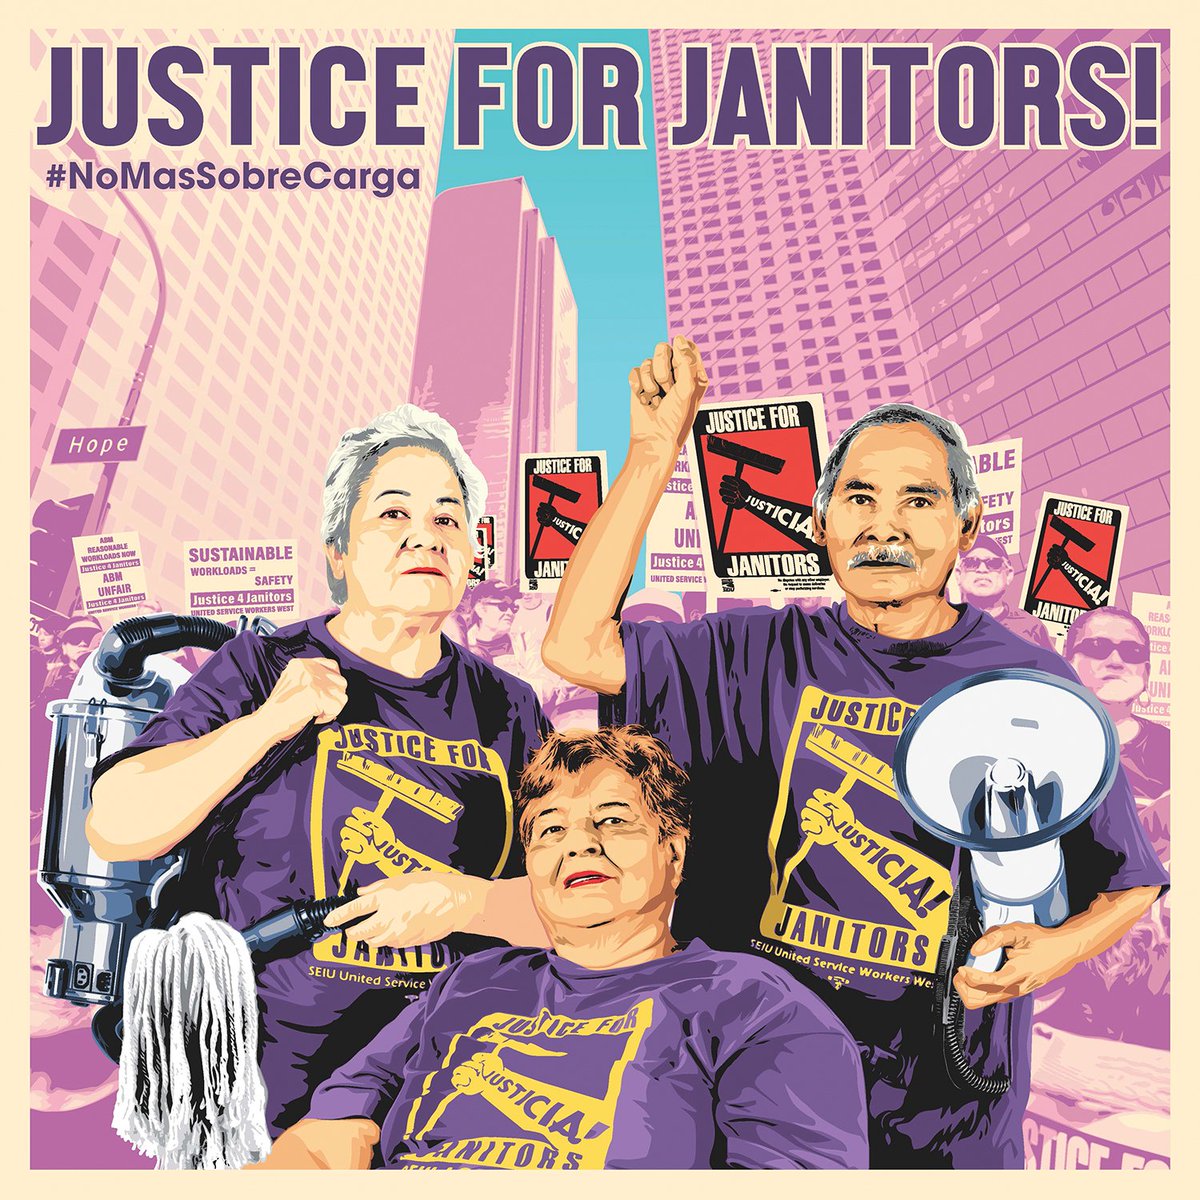 Hundreds of @seiuusww janitors are at the Capitol today to demand employers #EndJanitorAbuseandExploitation by passing #AB2364 in California to set safety standards, regulations and protections for janitors. #JusticeForJanitors